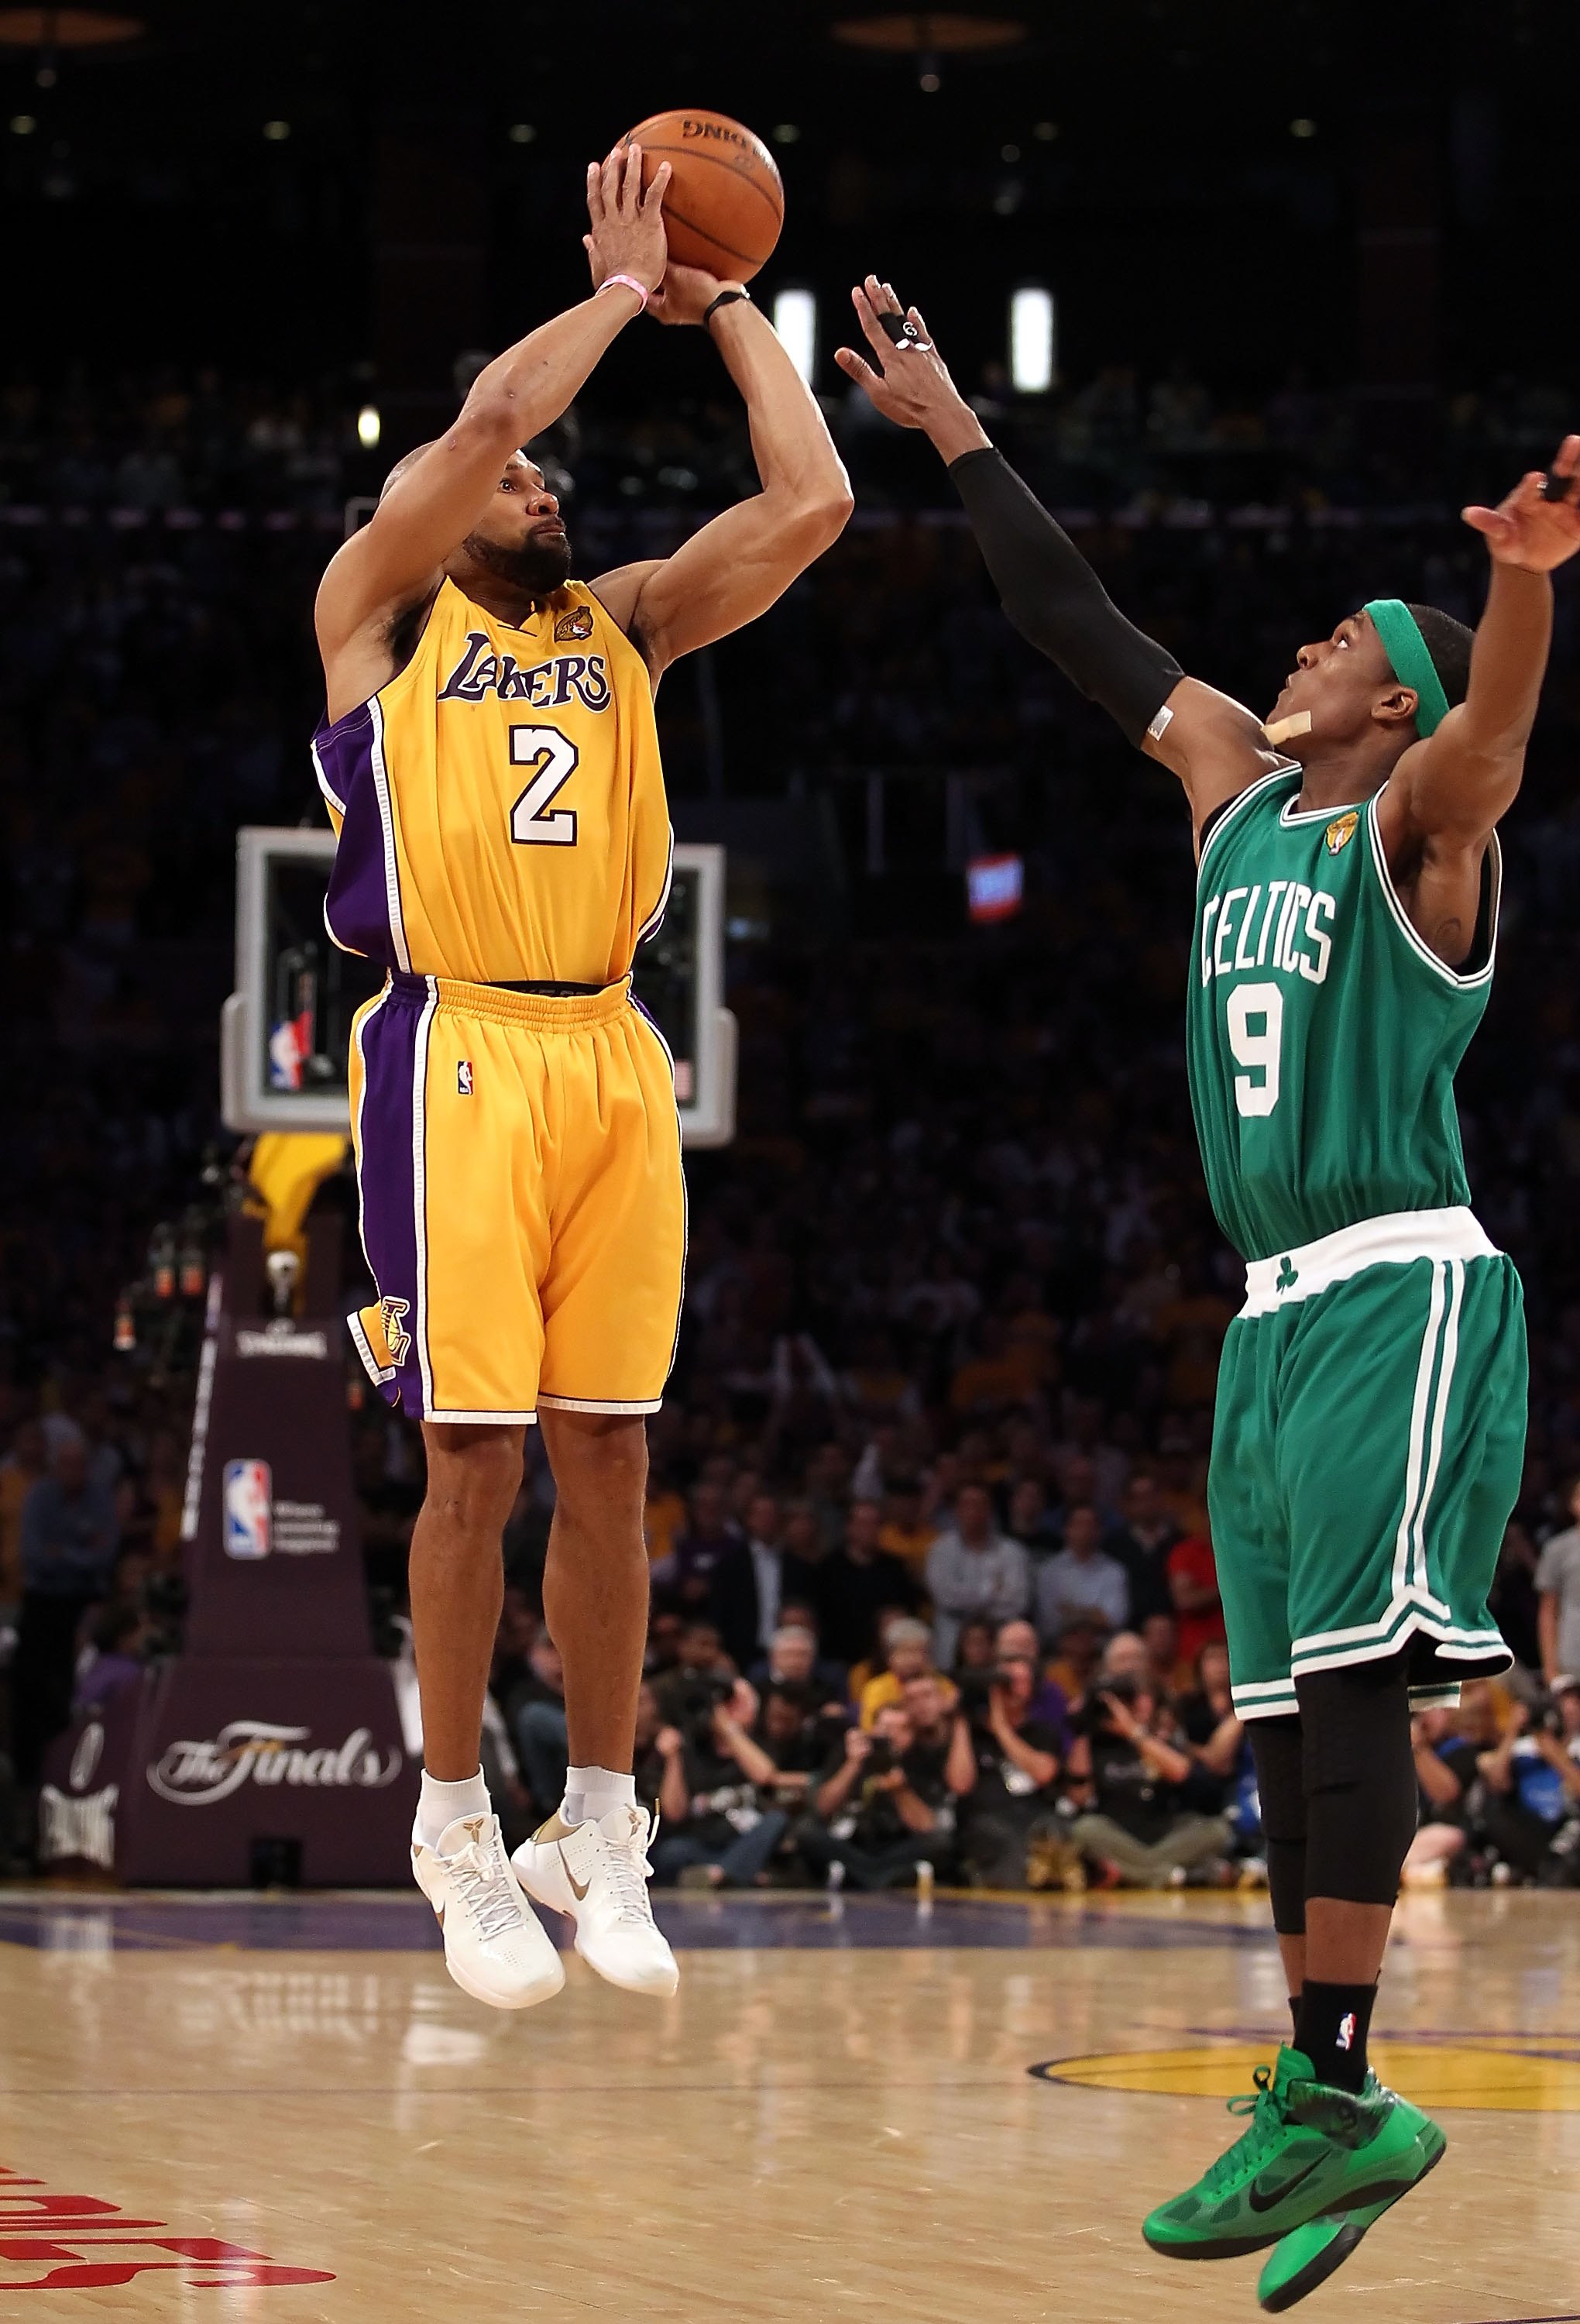 LOS ANGELES, CA - JUNE 17:  Derek Fisher #2 of the Los Angeles Lakers puts up a three point shot over Rajon Rondo #9 of the Boston Celtics in Game Seven of the 2010 NBA Finals at Staples Center on June 17, 2010 in Los Angeles, California.  The Lakers defe